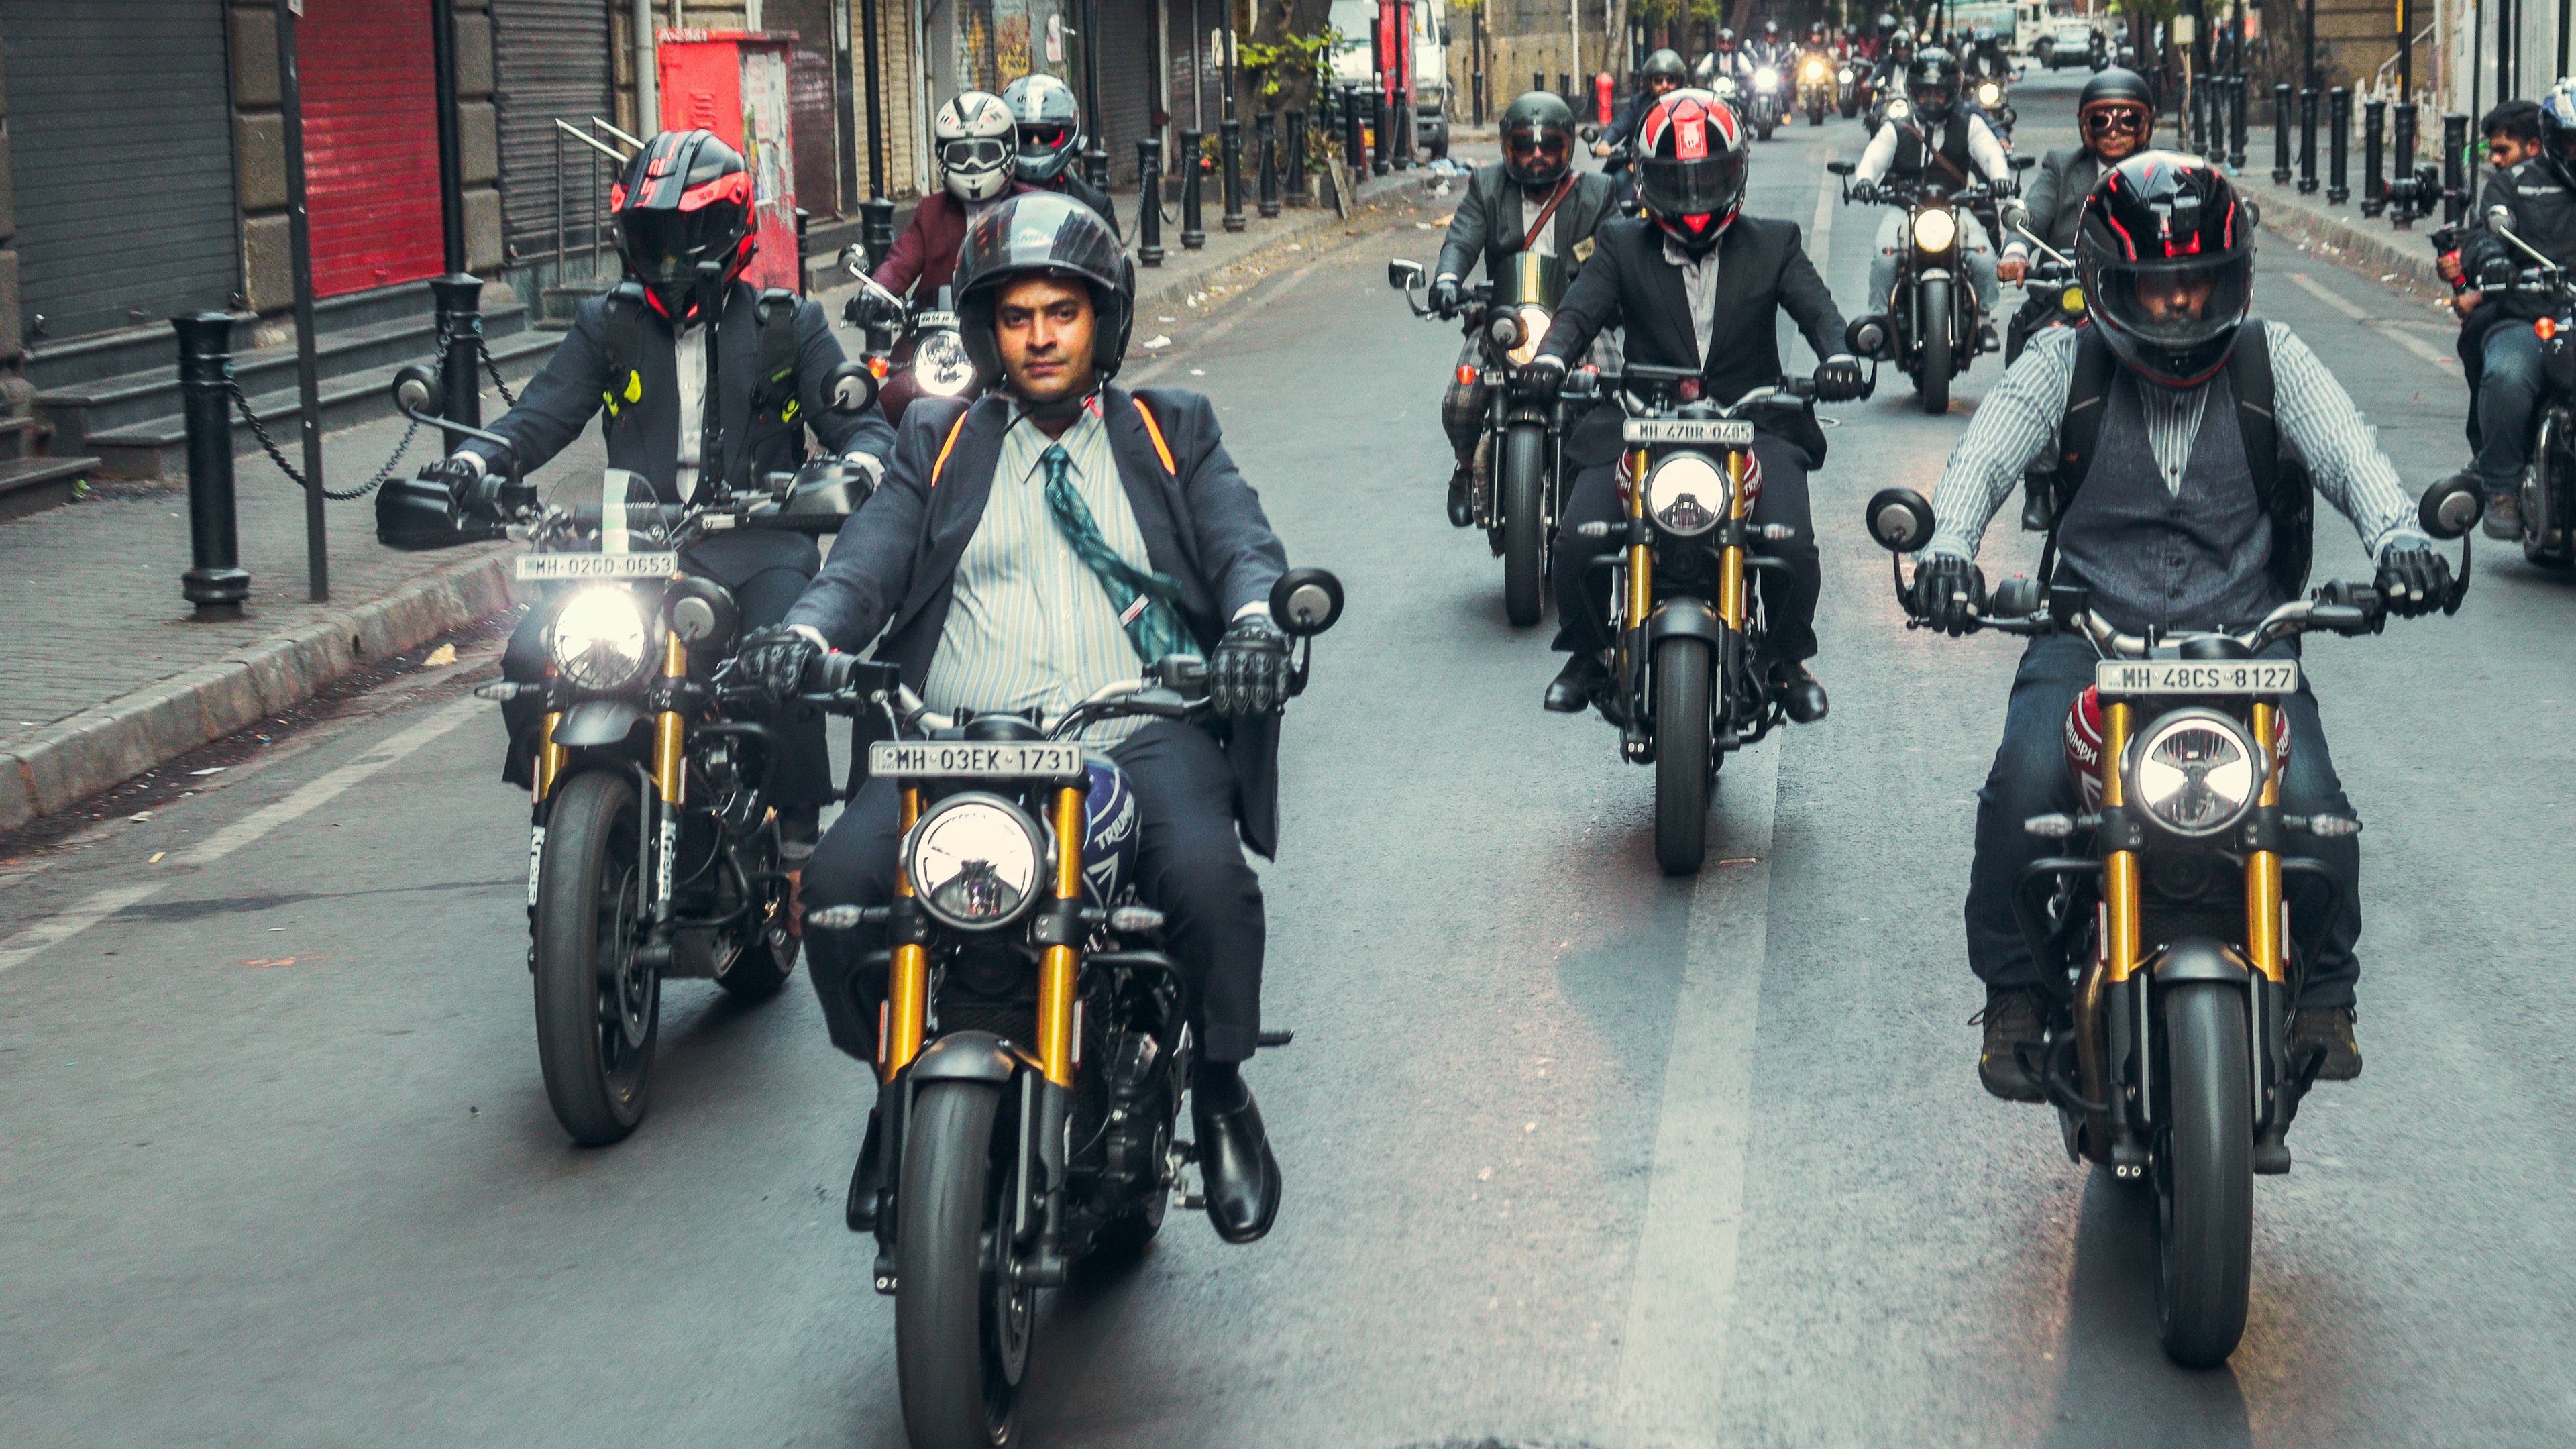 The Distinguished Gentleman's Ride has been held globally over 11 years in an effort to raise awareness for prostate cancer research and men’s mental health